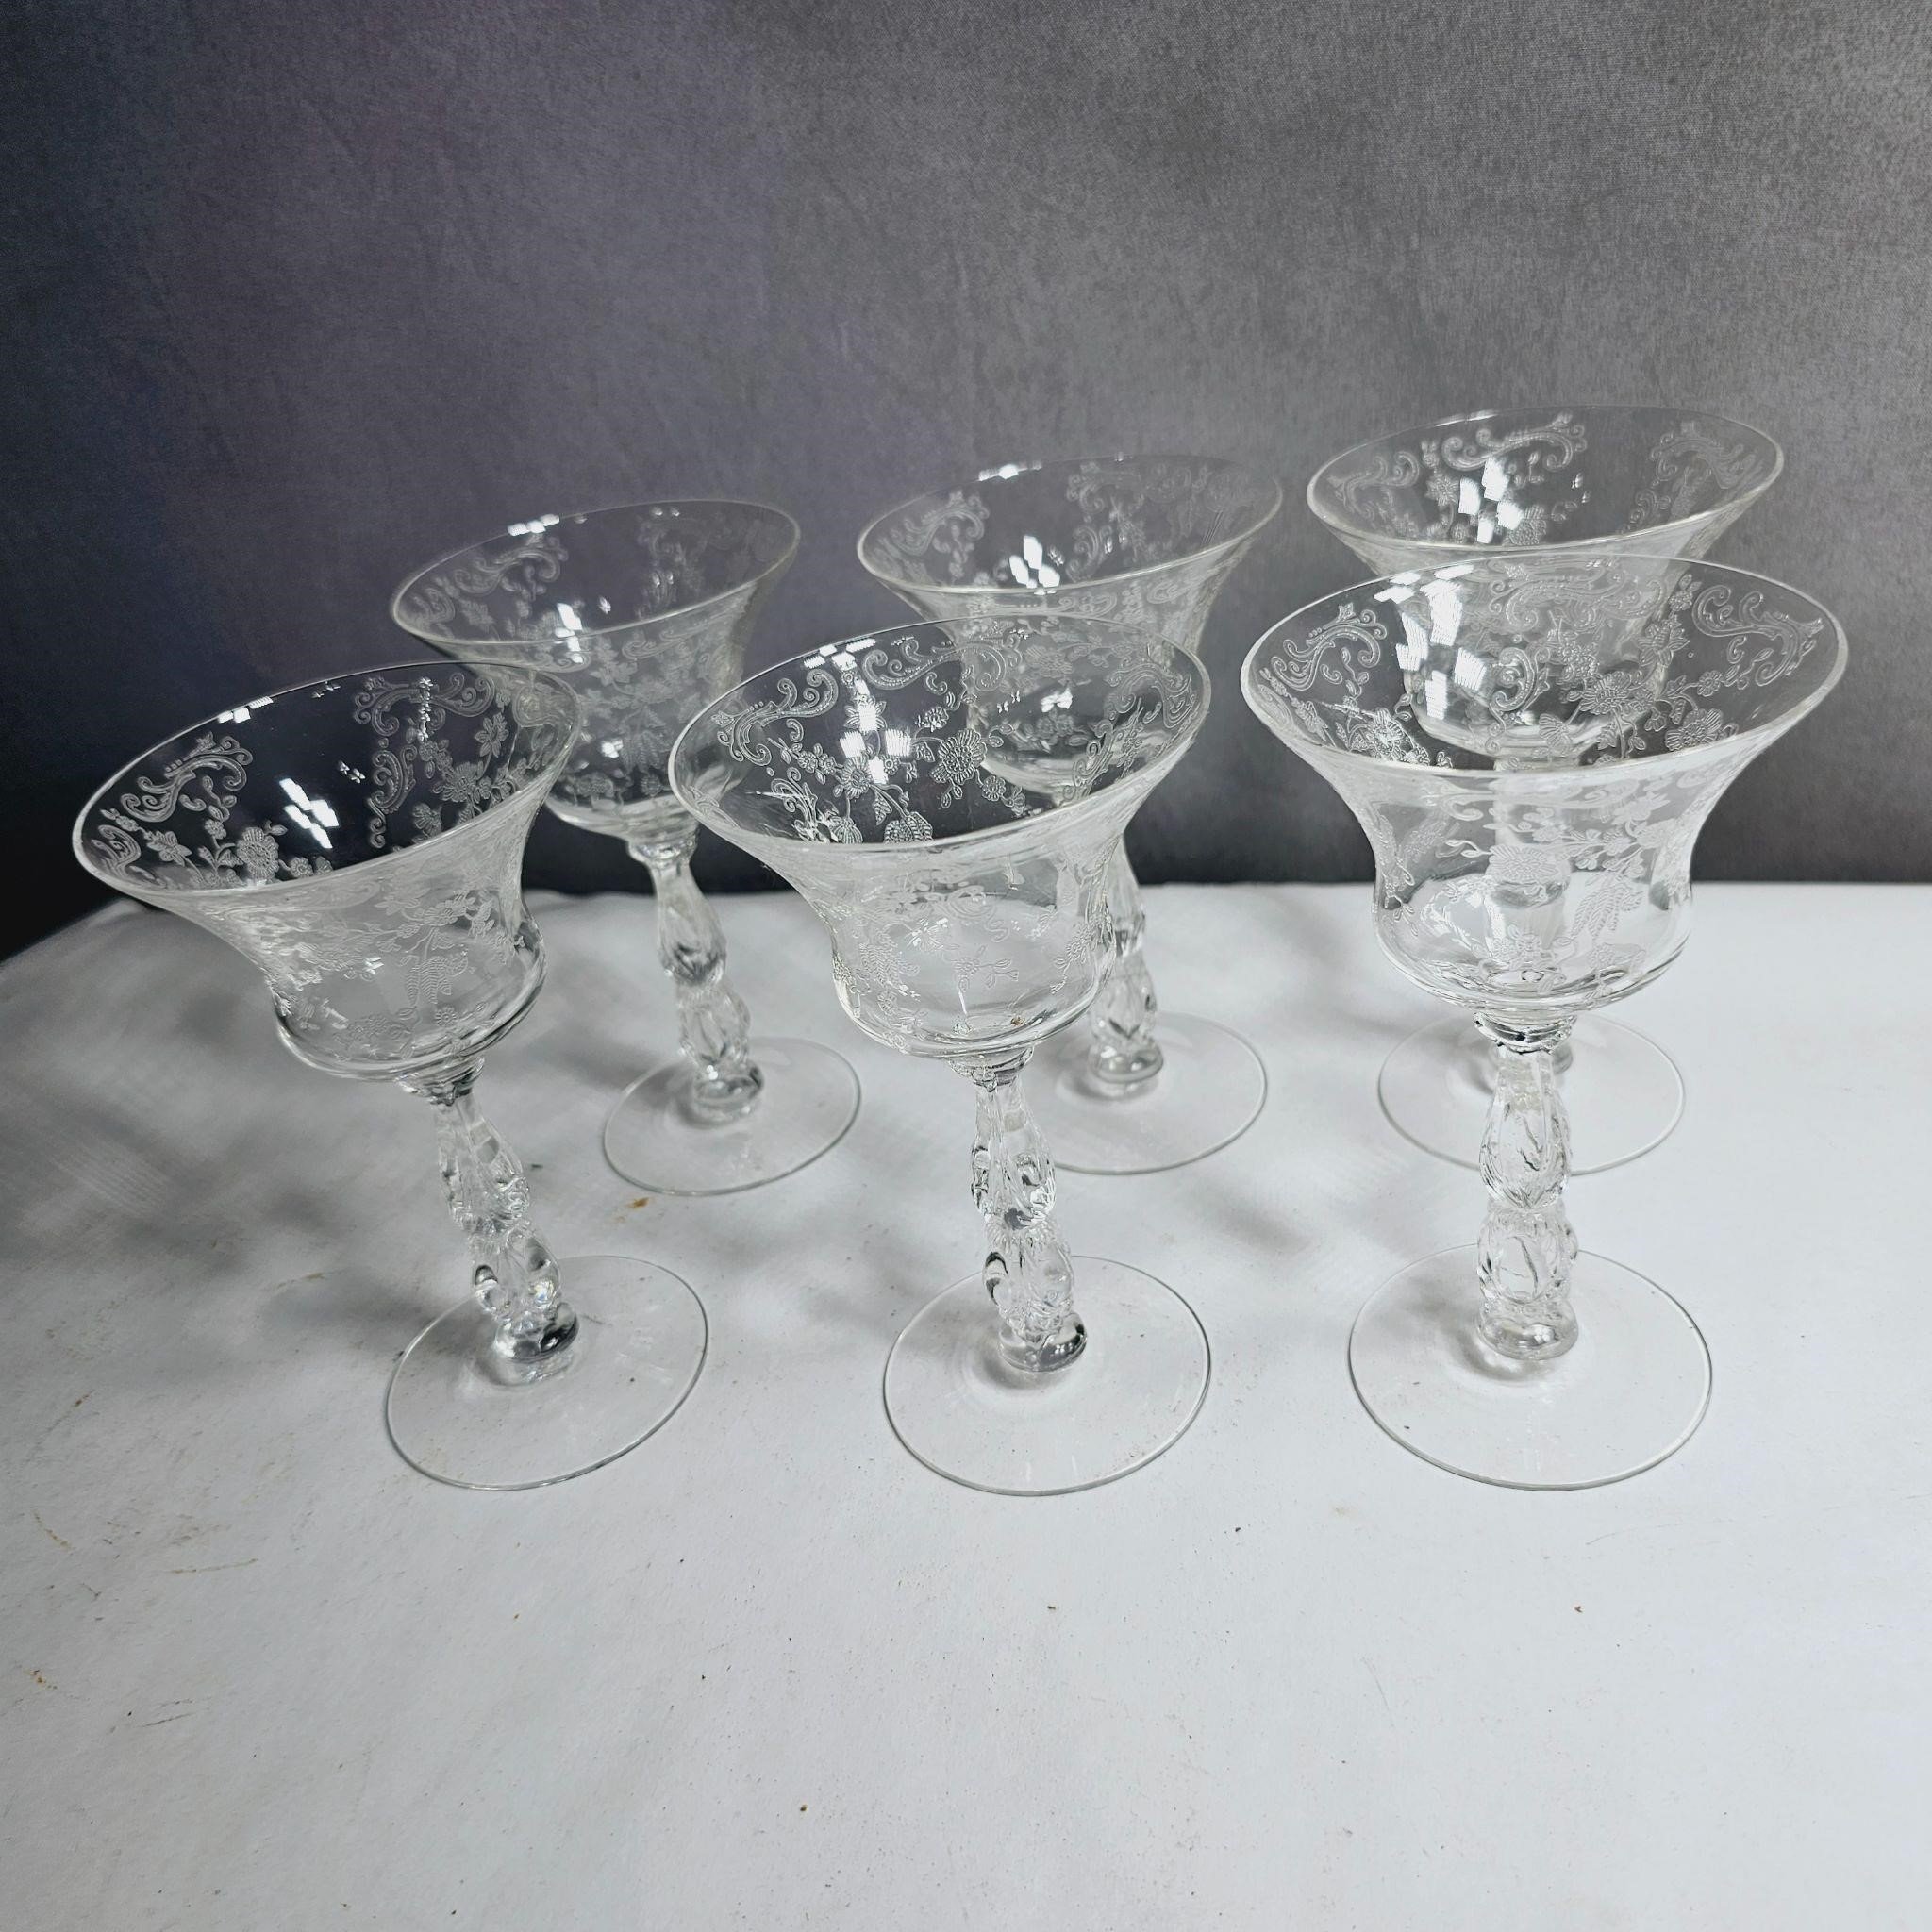 High-End Glass Online Auction